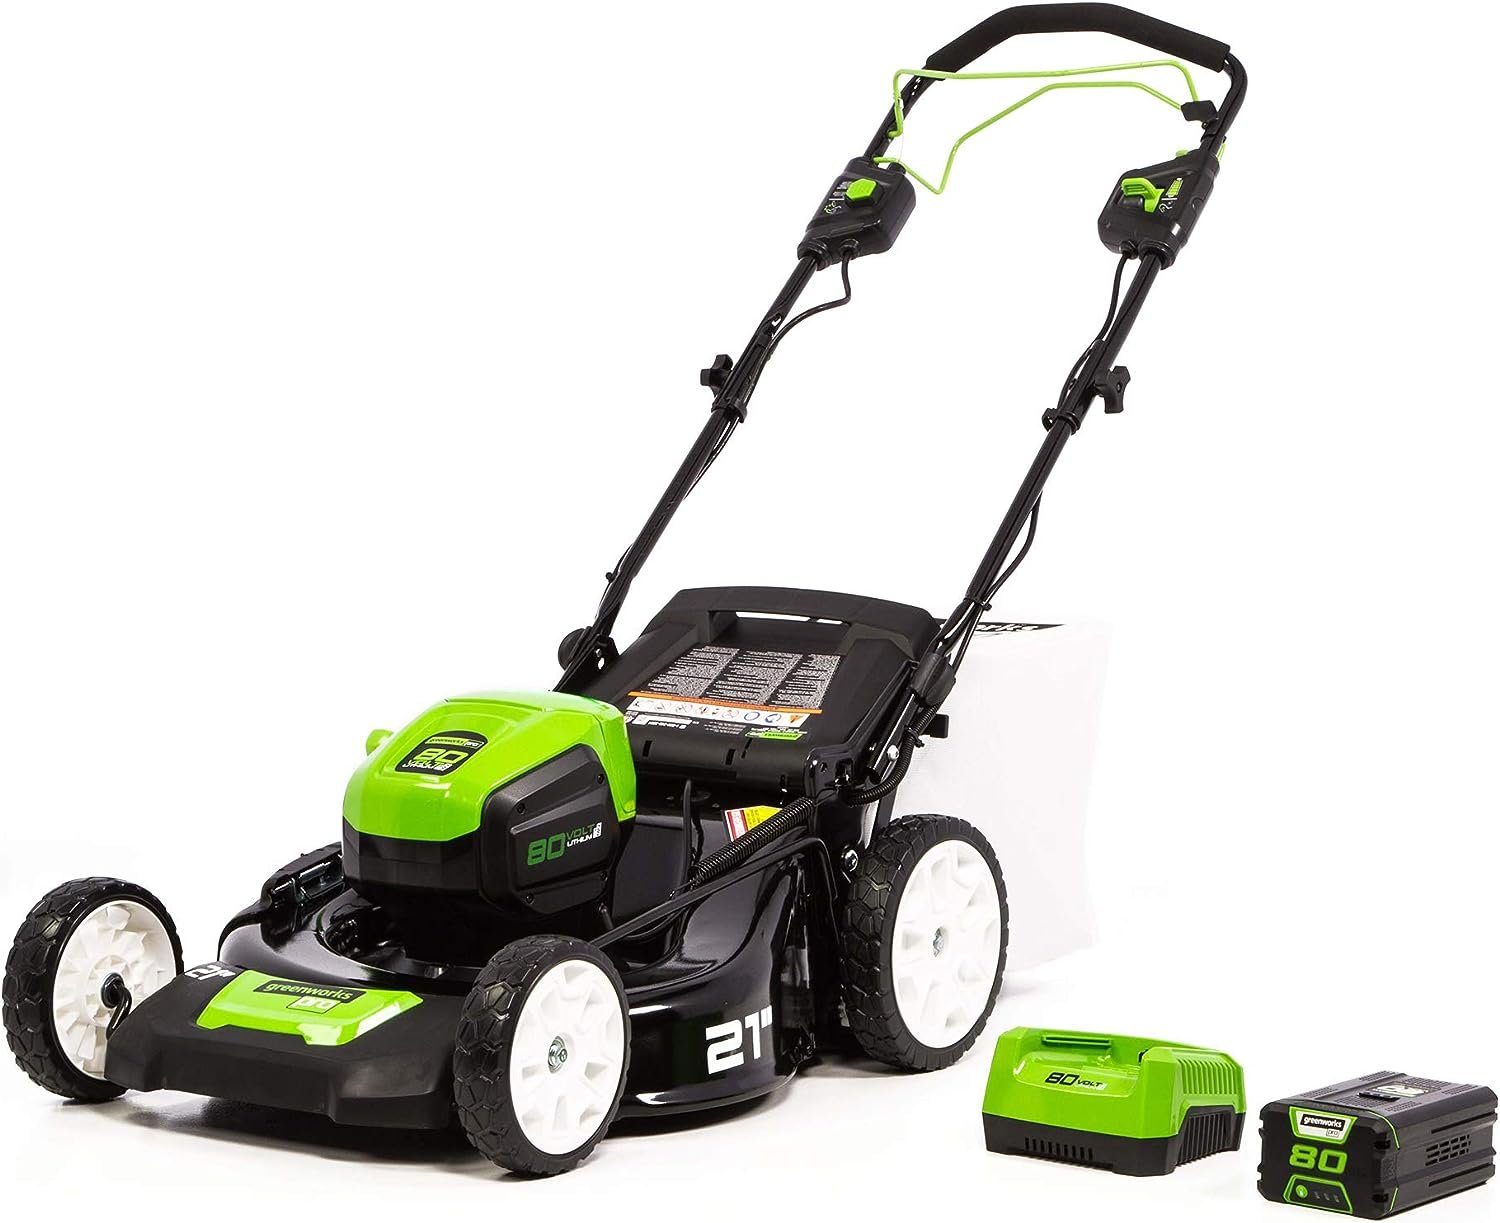 Greenworks Pro 21-Inch 80V Self-Propelled Cordless Lawn Mower review